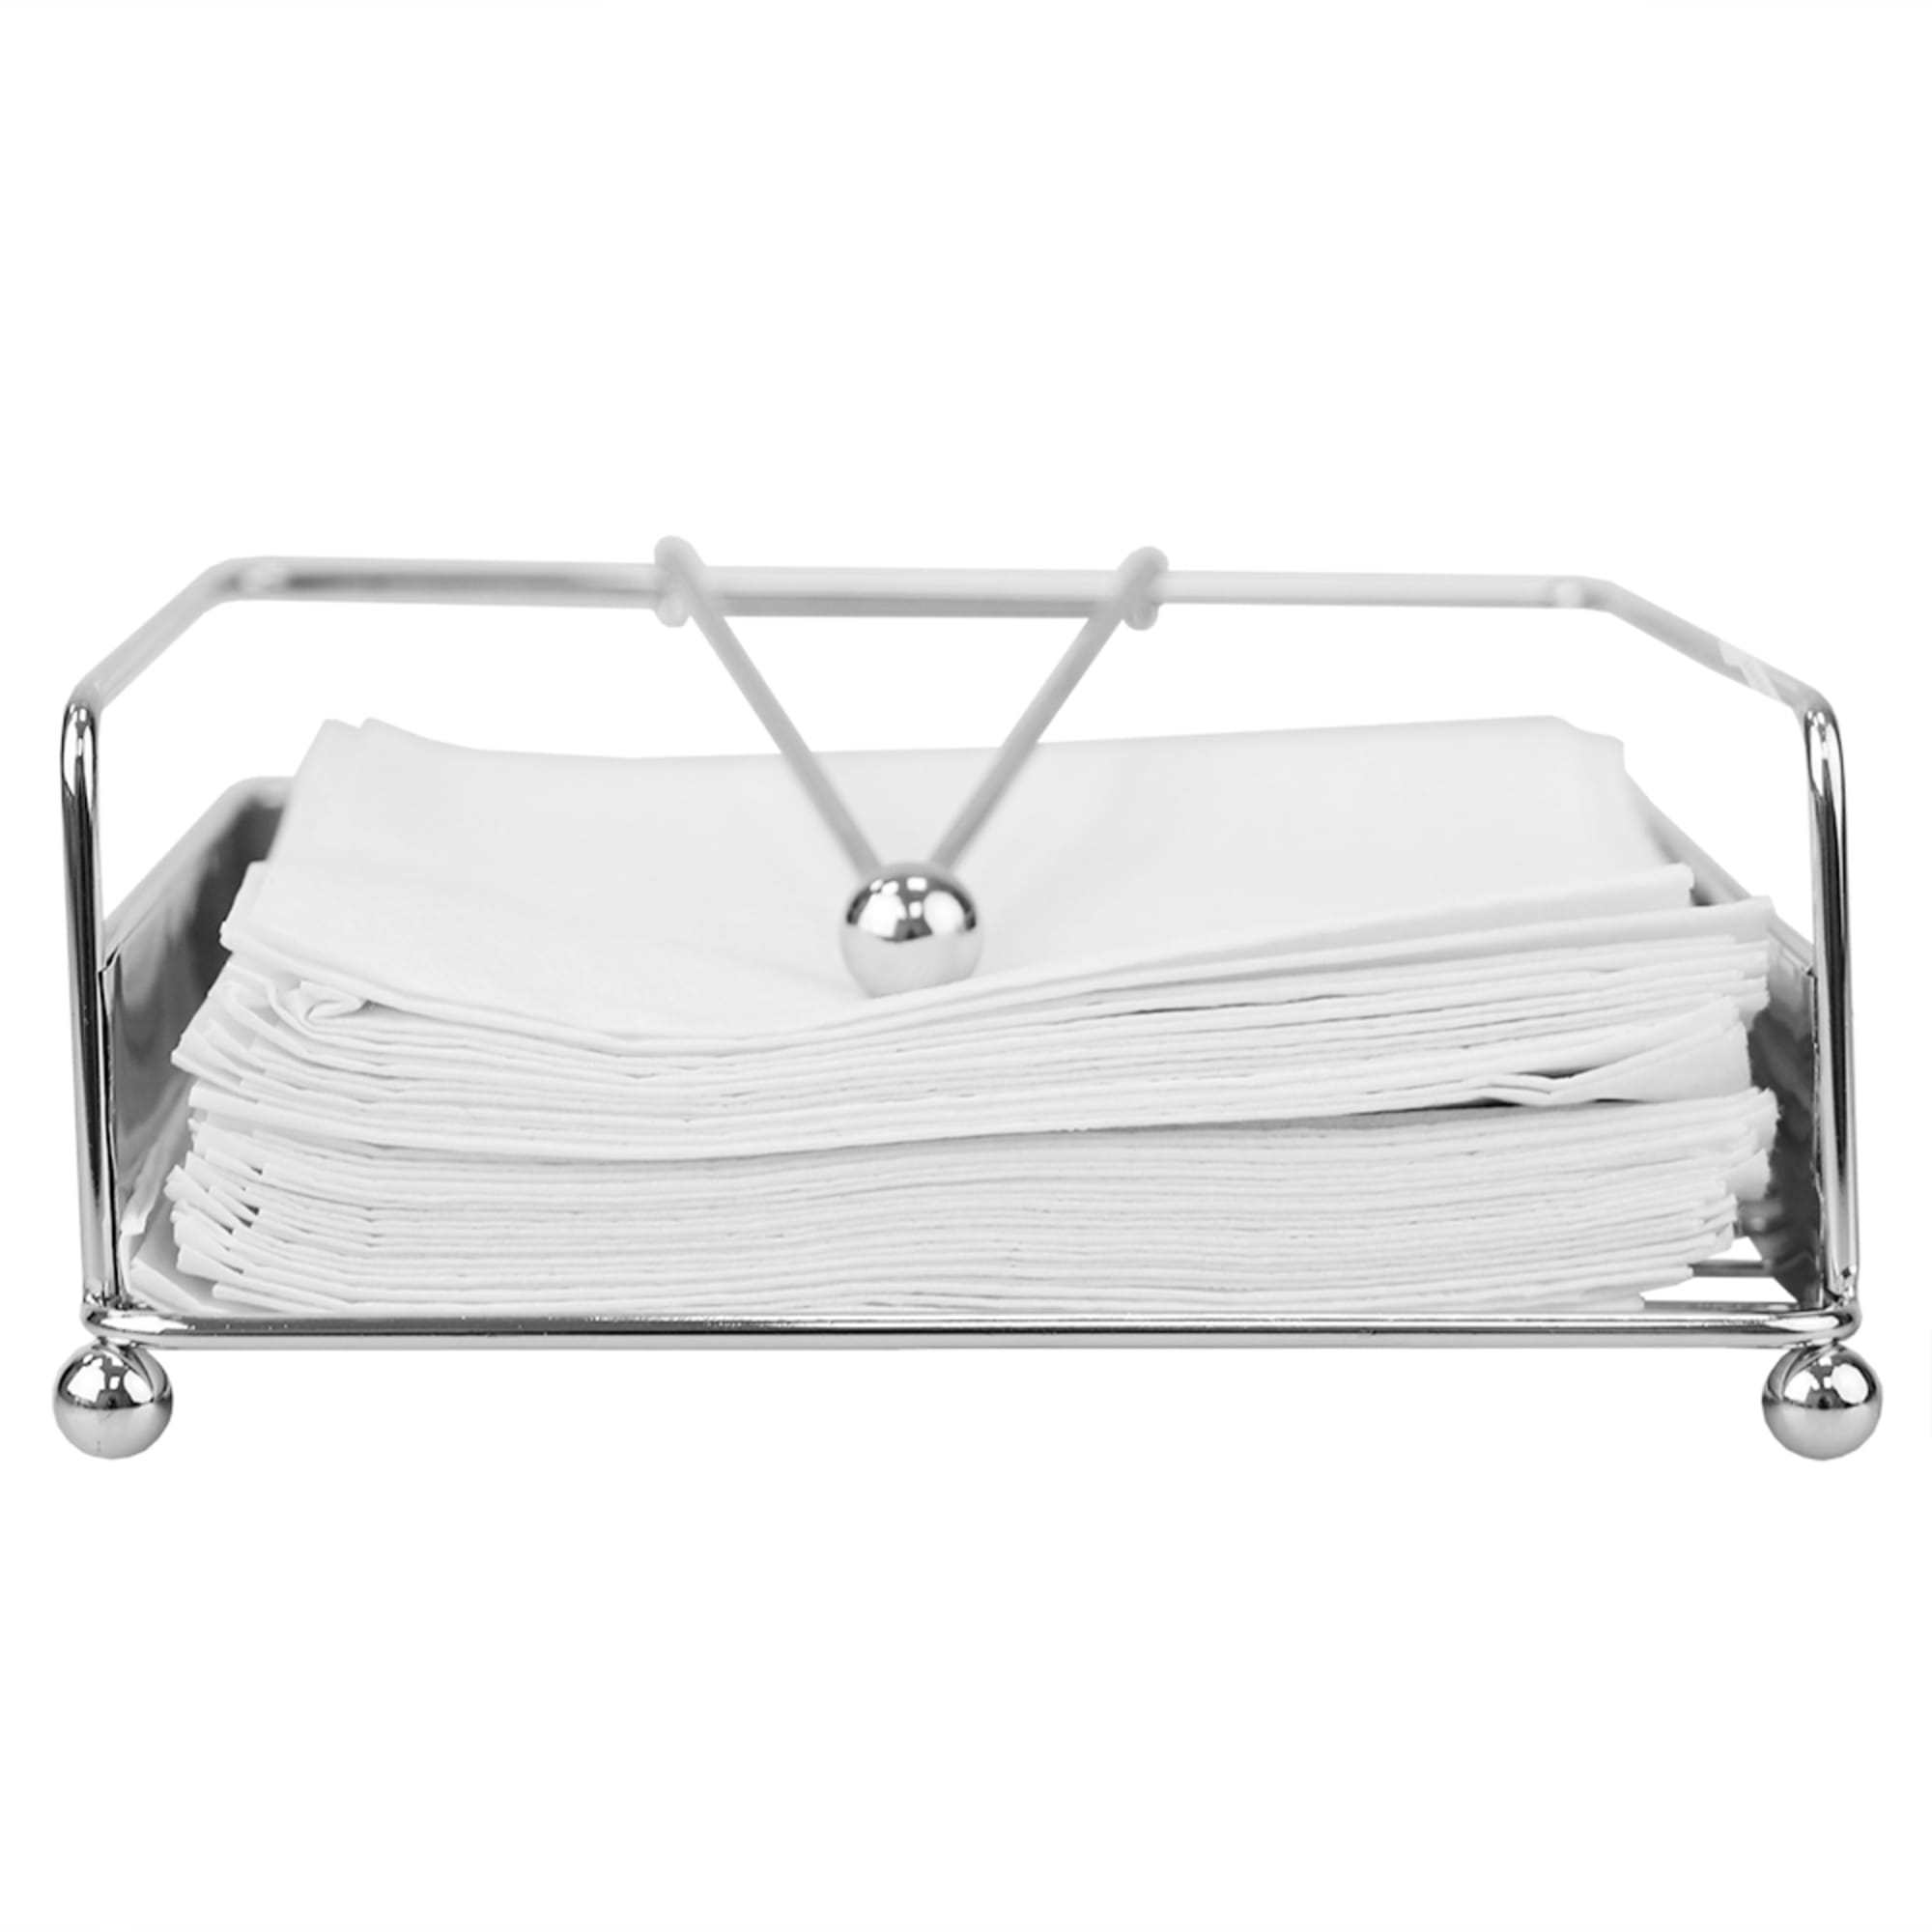 Home Basics Pave Flat Steel Napkin Holder with Weighted Pivoting Arm, Chrome $6.00 EACH, CASE PACK OF 12